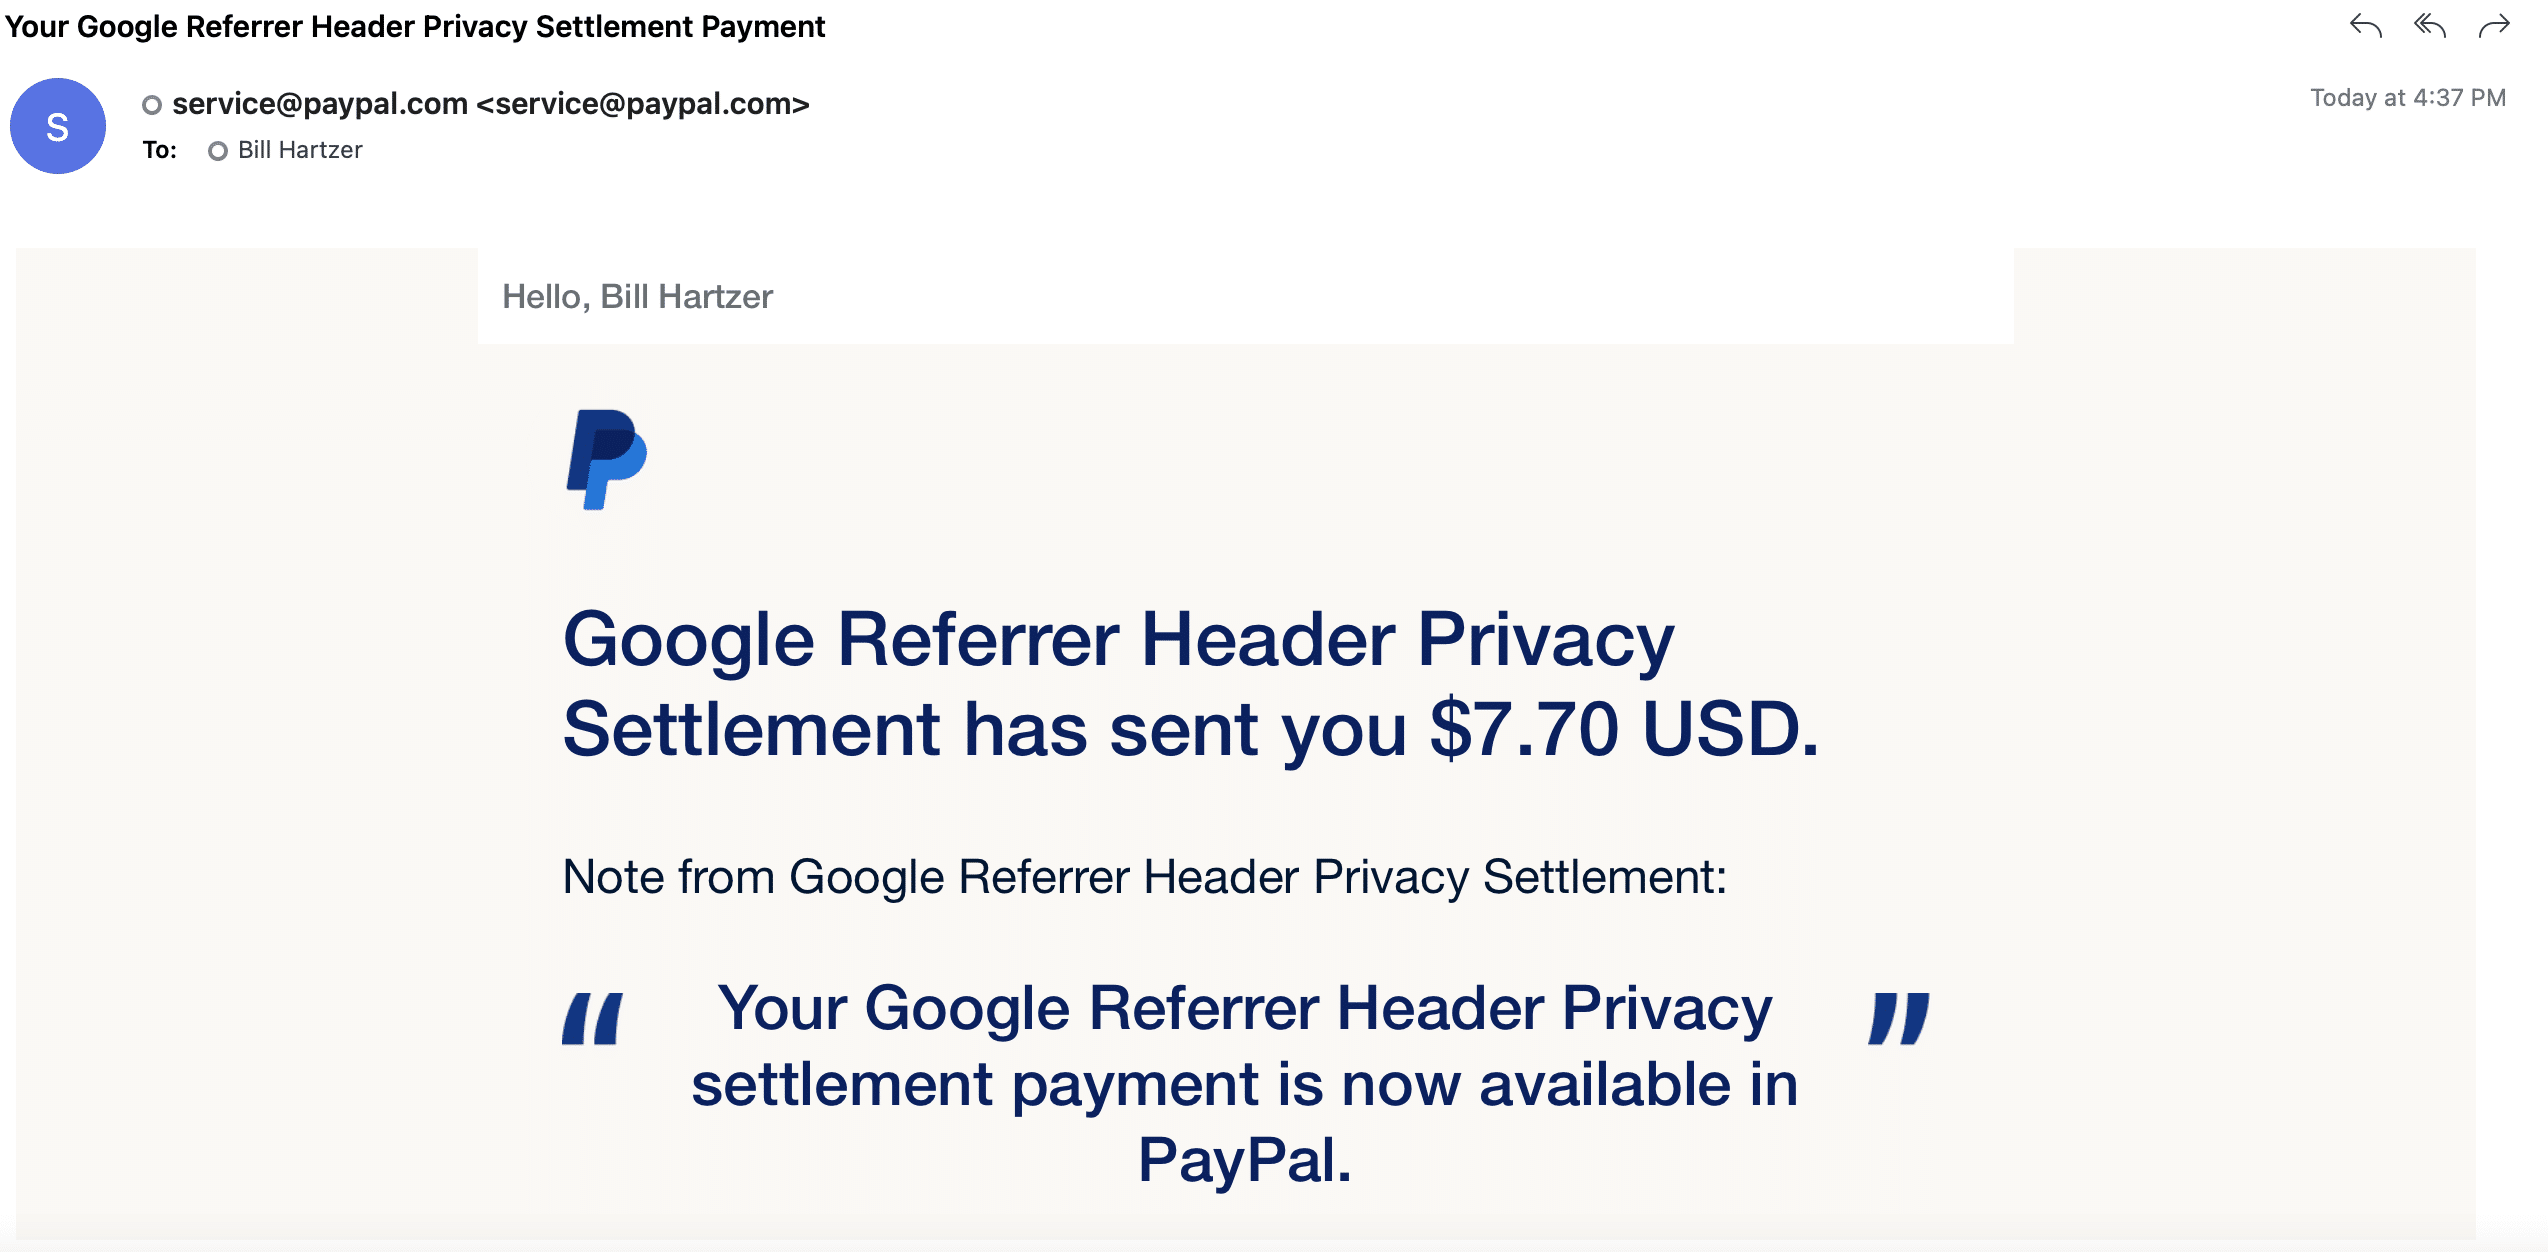 Google Referrer Header Privacy Settlement payment from PayPal.